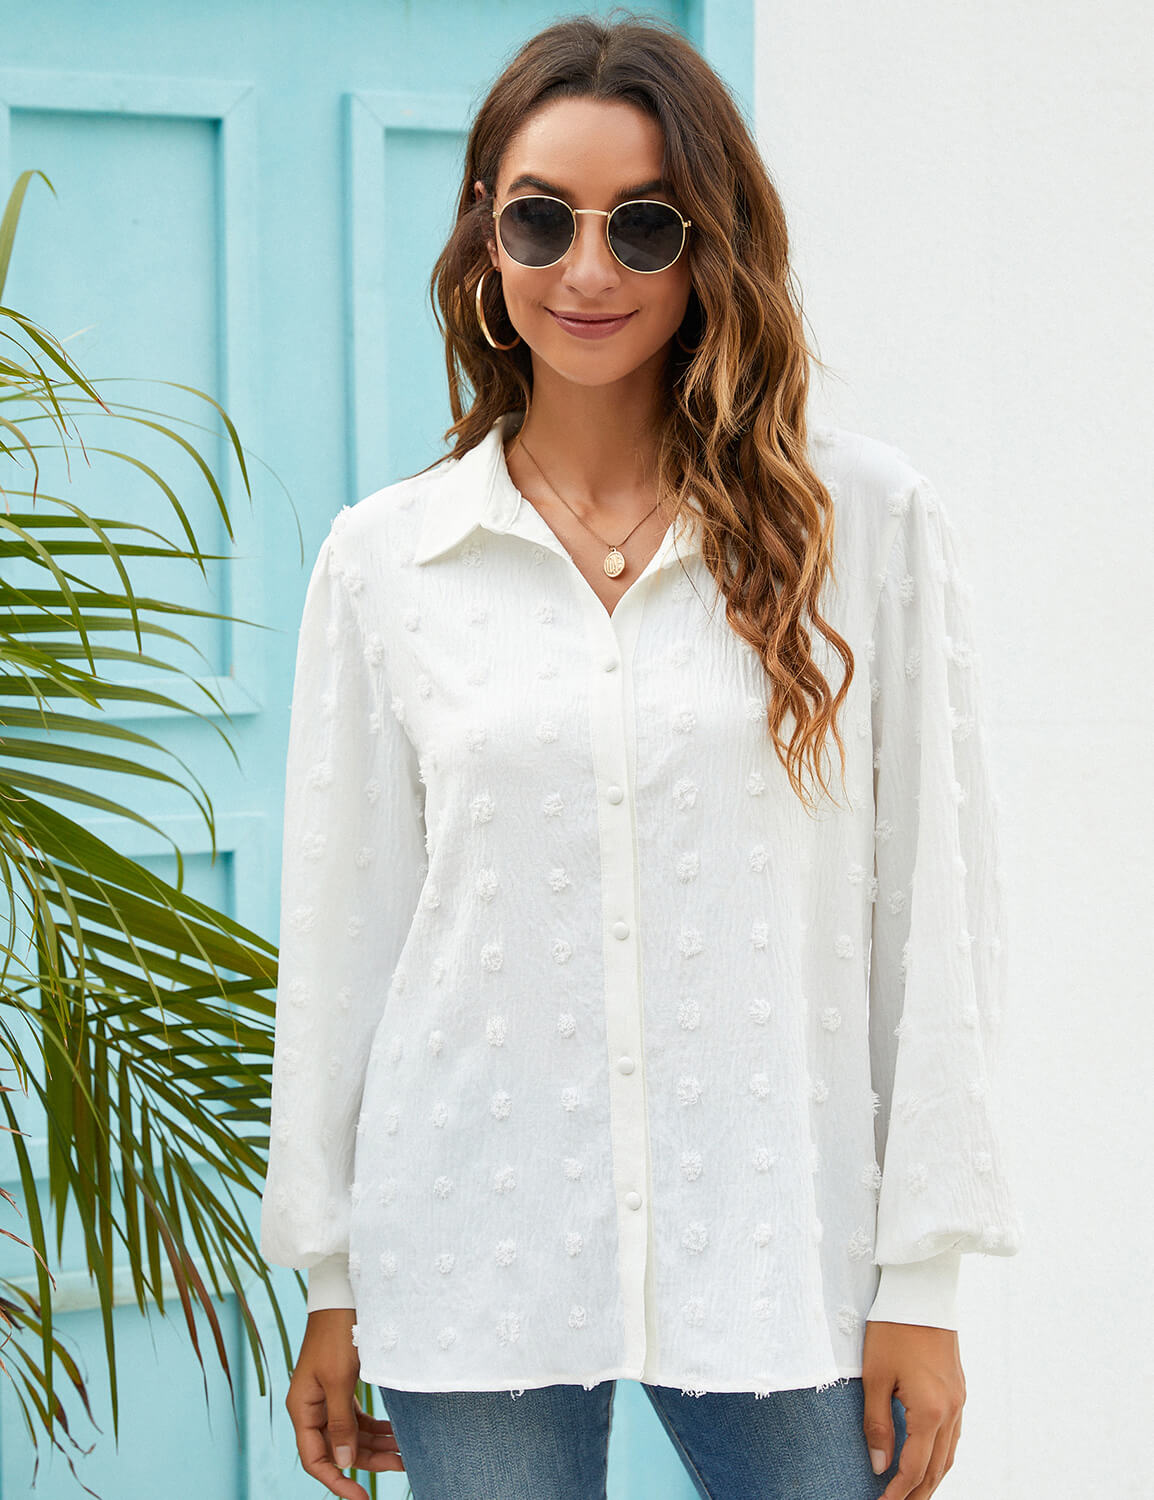 Women's Business Casual Dotted Swiss White Shirt | Blooming Jelly